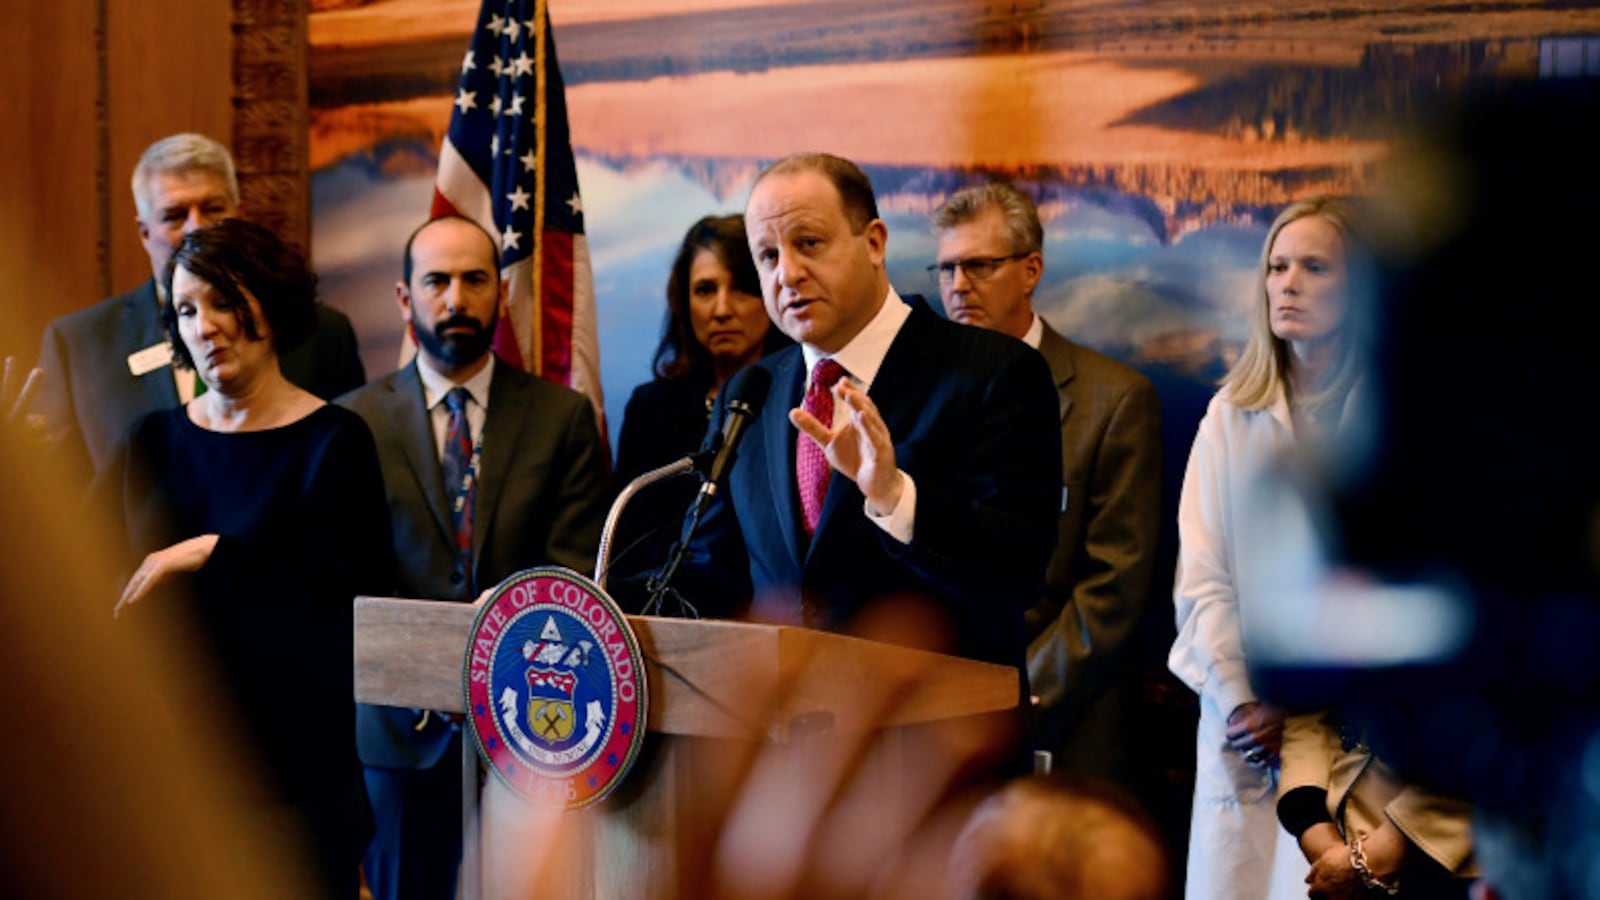 Colorado Governor Jared Polis speaks at a State of Colorado podium, surrounded by several people.